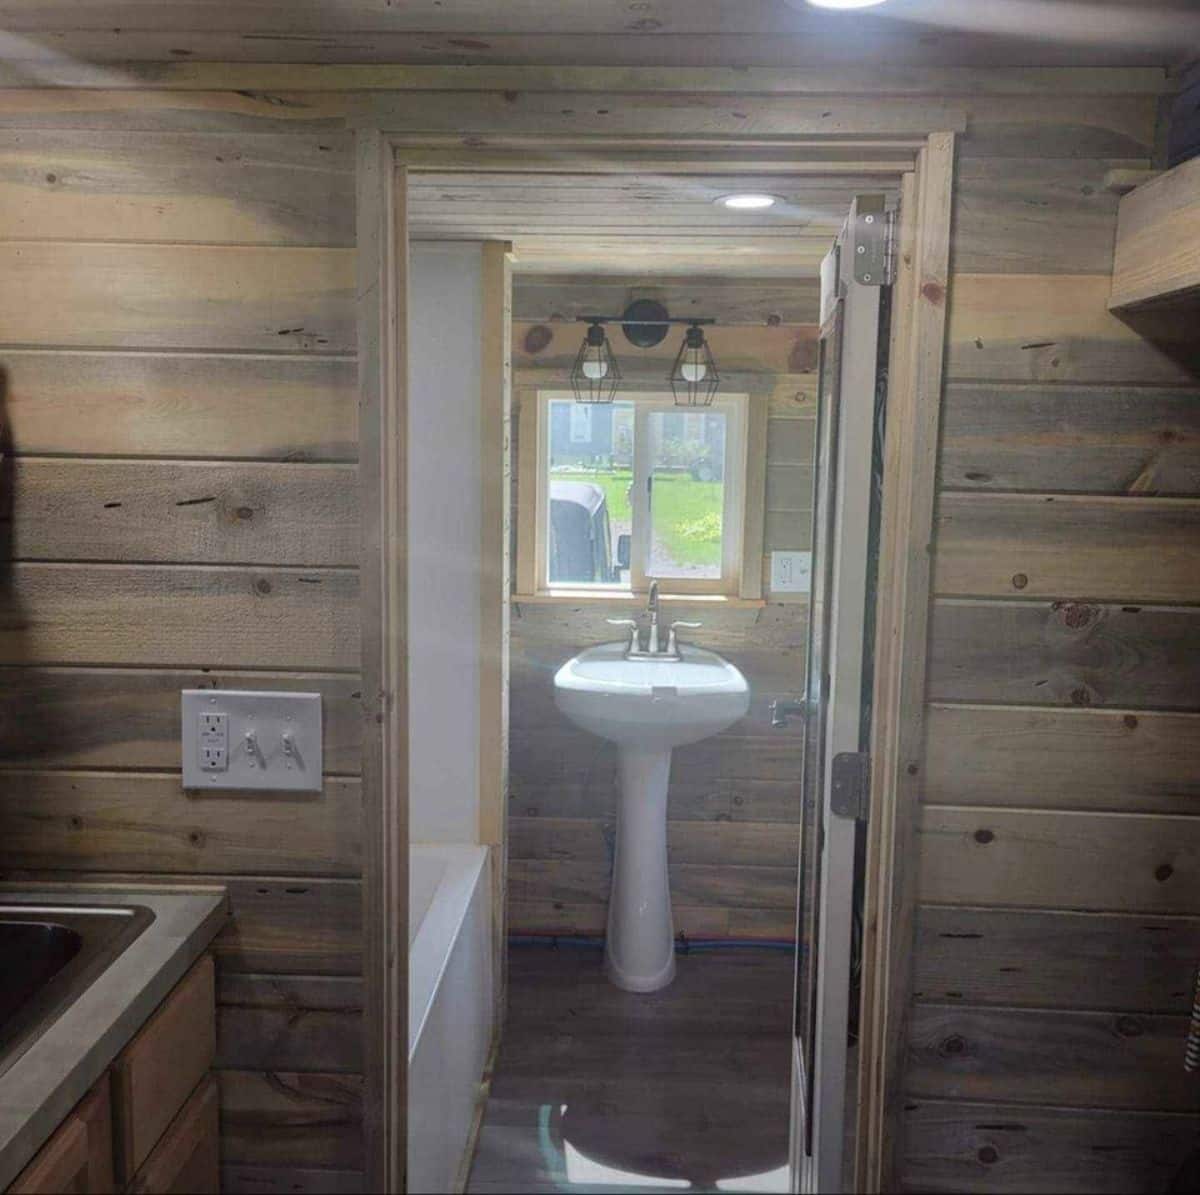 Bathtub in bathroom of 20’ tiny house with two lofts